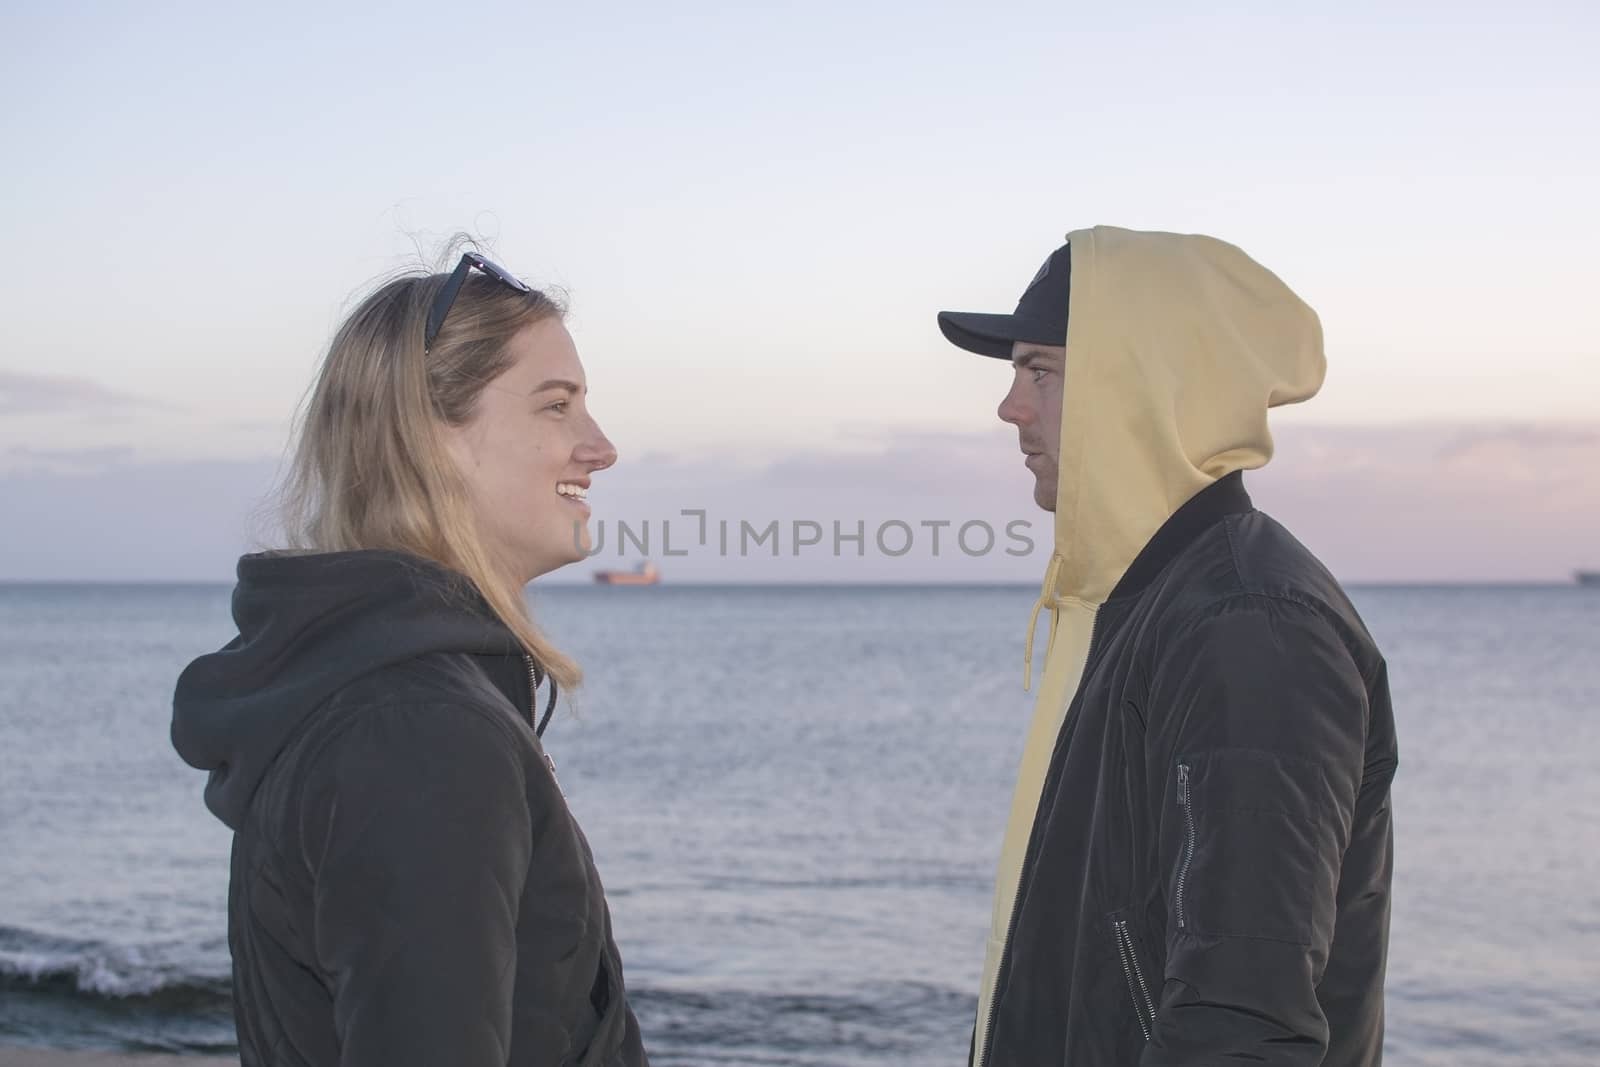 Handsome young natural and casual looking couple with hood jackets watch each other in profile at sunset on a beach.